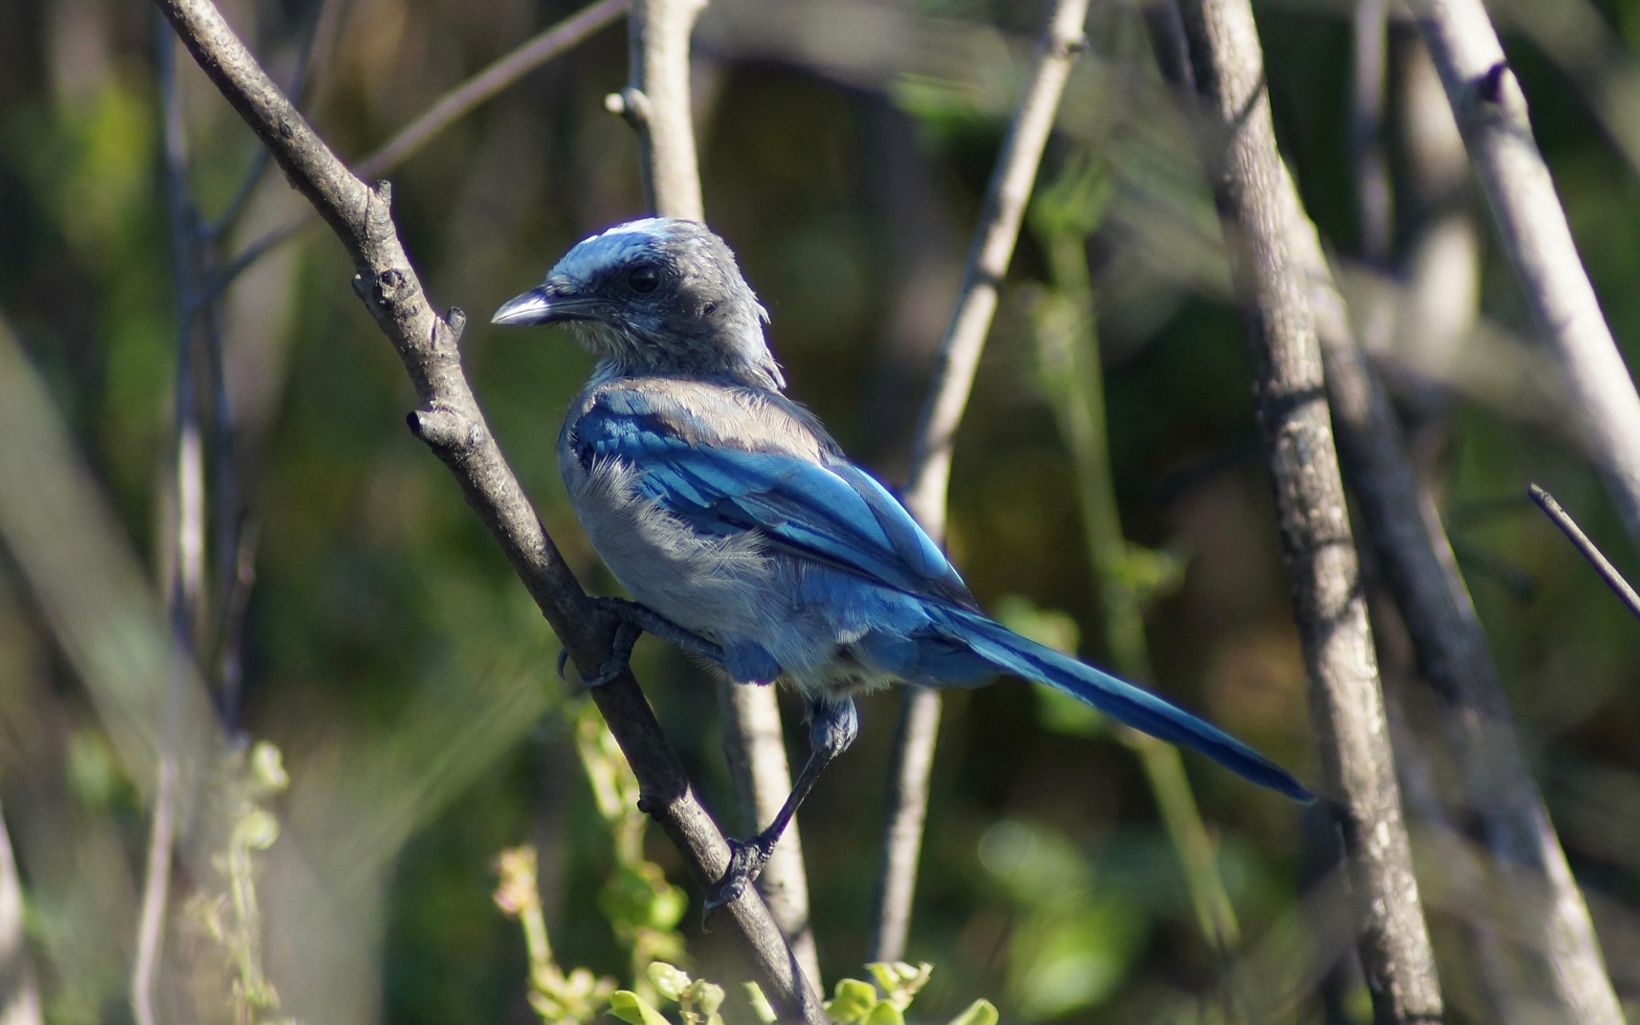 Florida scrub-jay perched in a tree at Disney Wilderness Preserve.